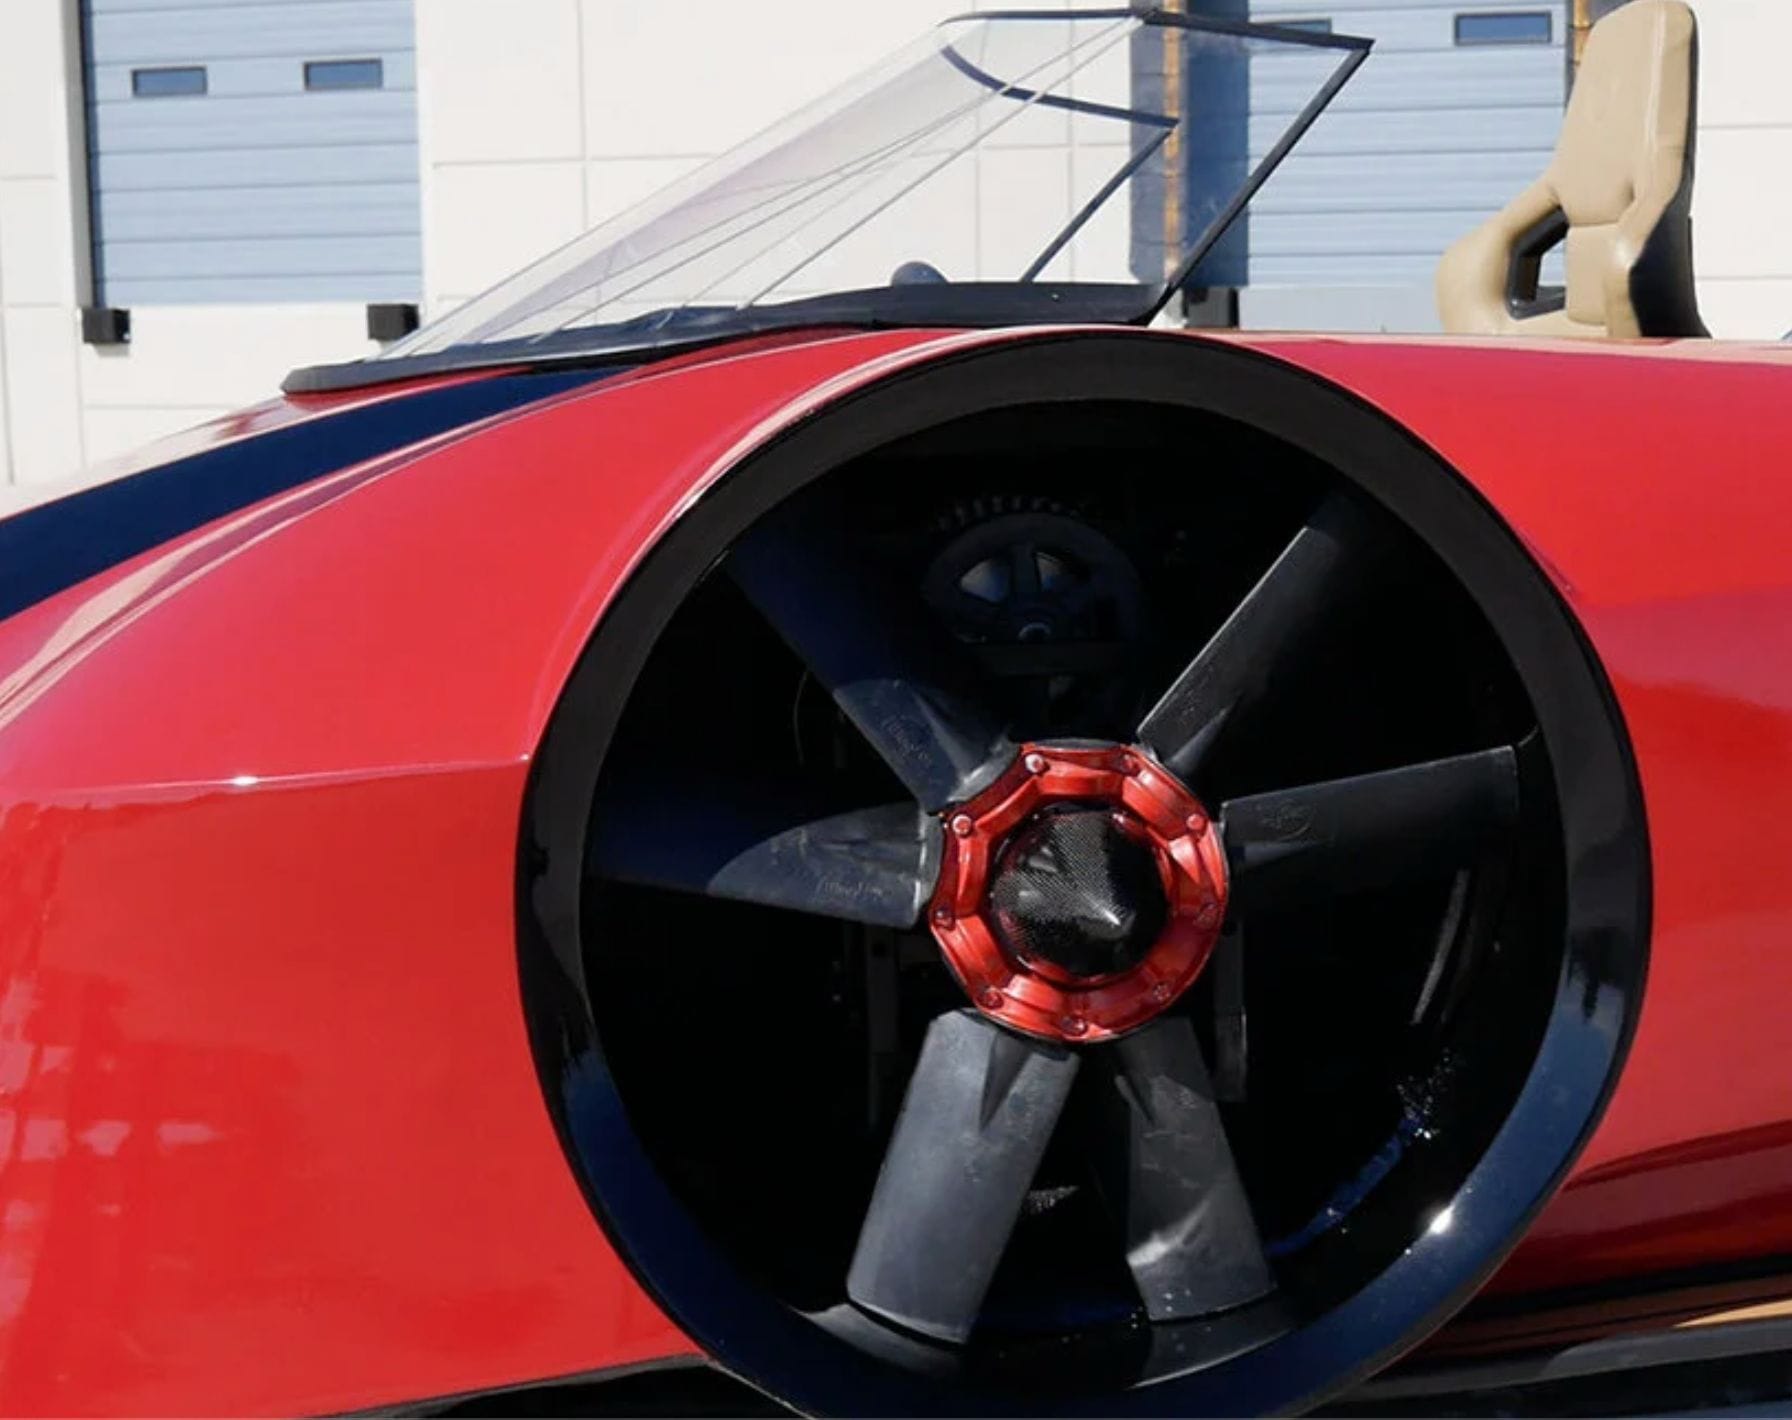 Close-up view of the Arosa's large wheel-like fans.